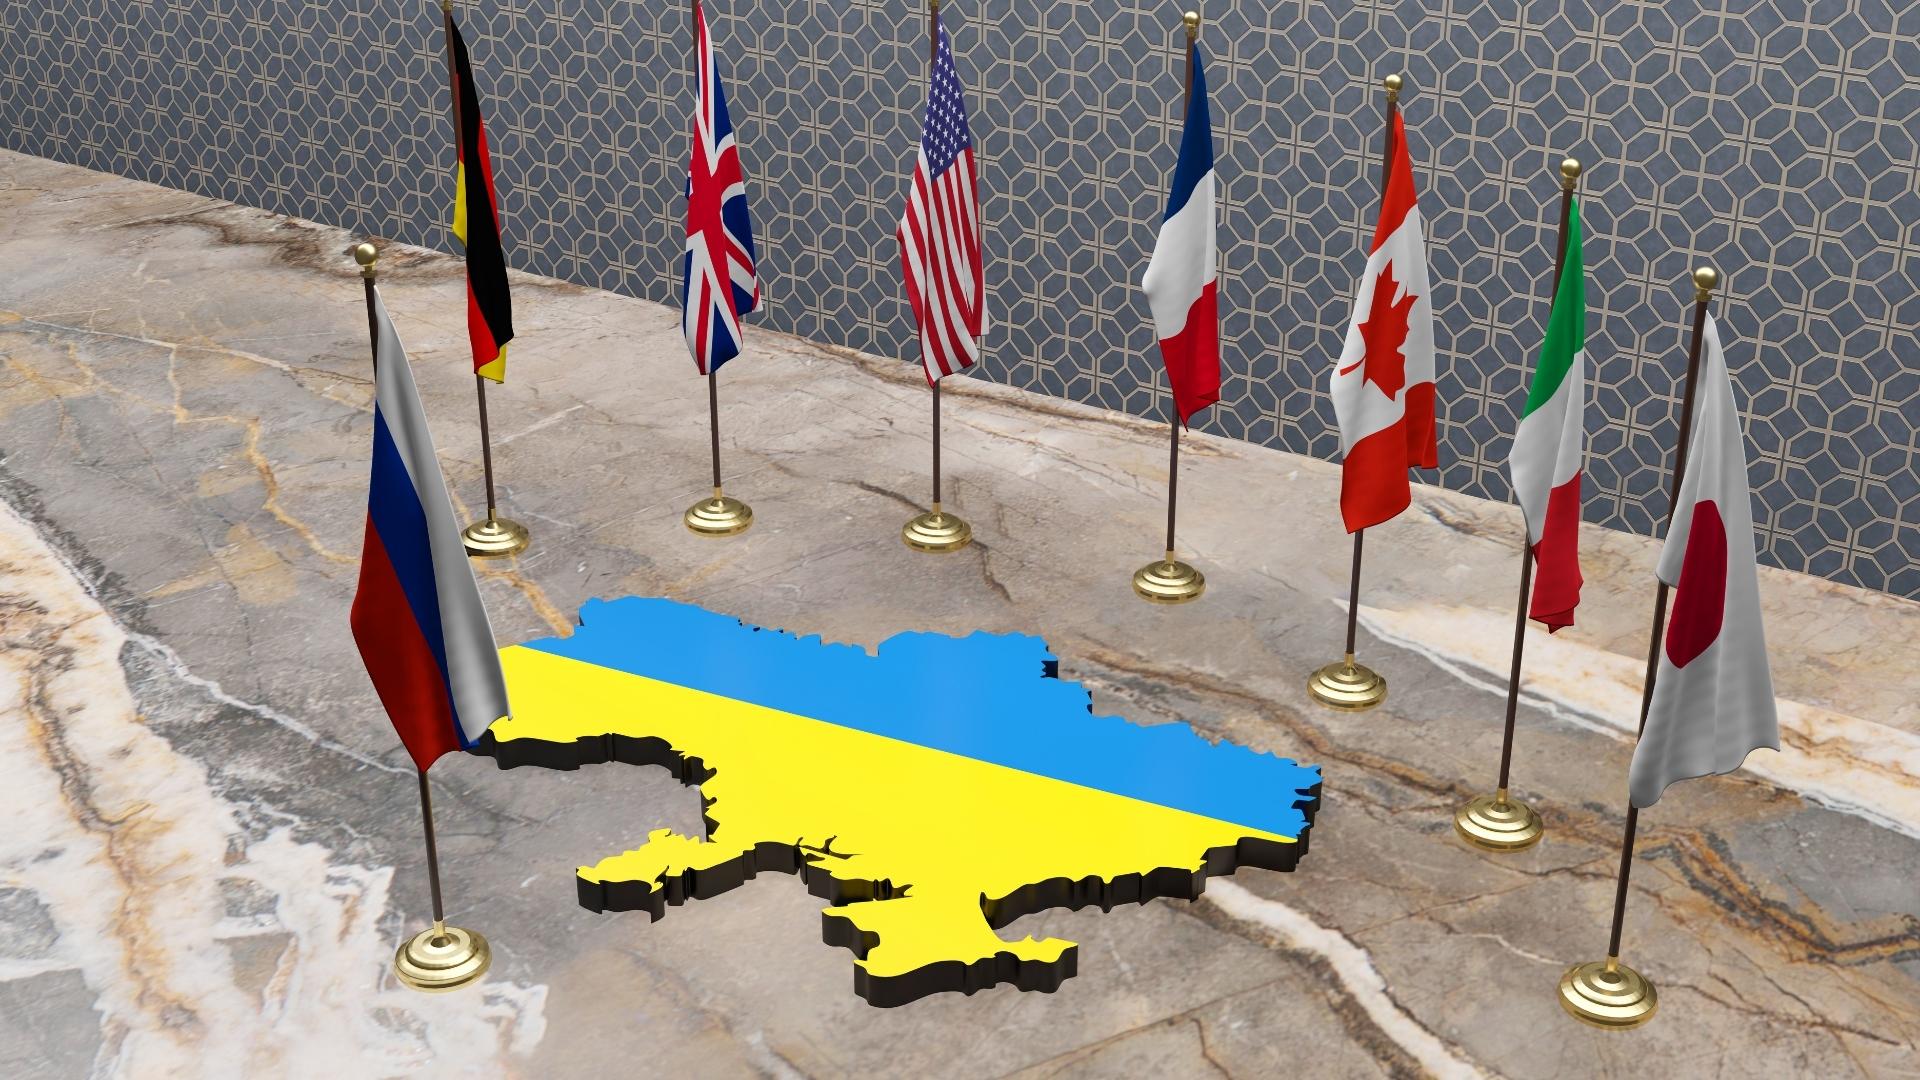 G7 finance chiefs to meet on Feb. 23 to discuss measures against Russia over Ukraine war